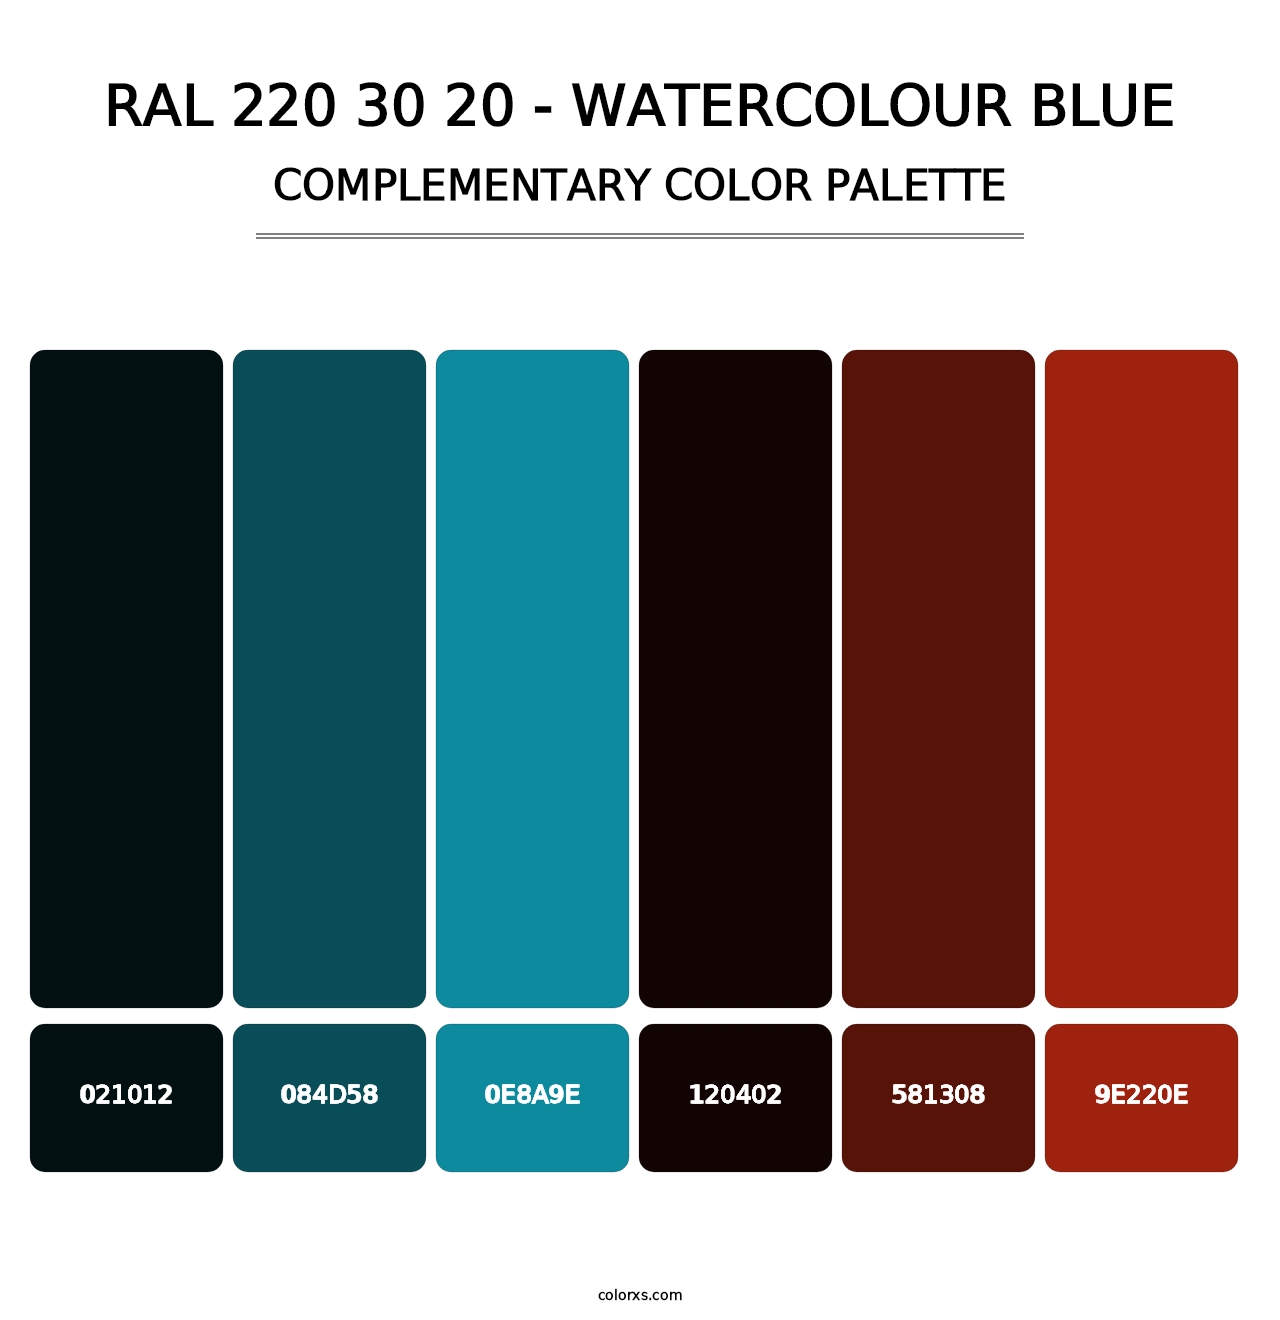 RAL 220 30 20 - Watercolour Blue - Complementary Color Palette